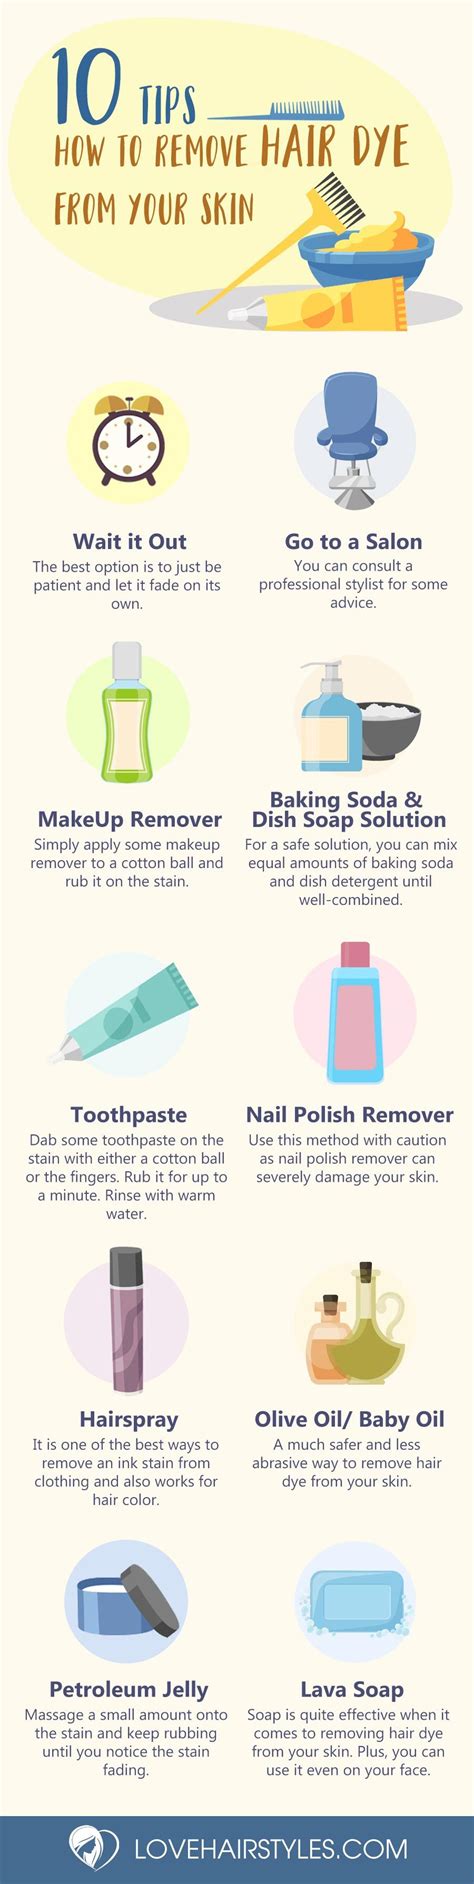 How can i remove black hair dye from my skin? How To Remove Hair Dye From Skin | Hair dye removal, Dyed ...